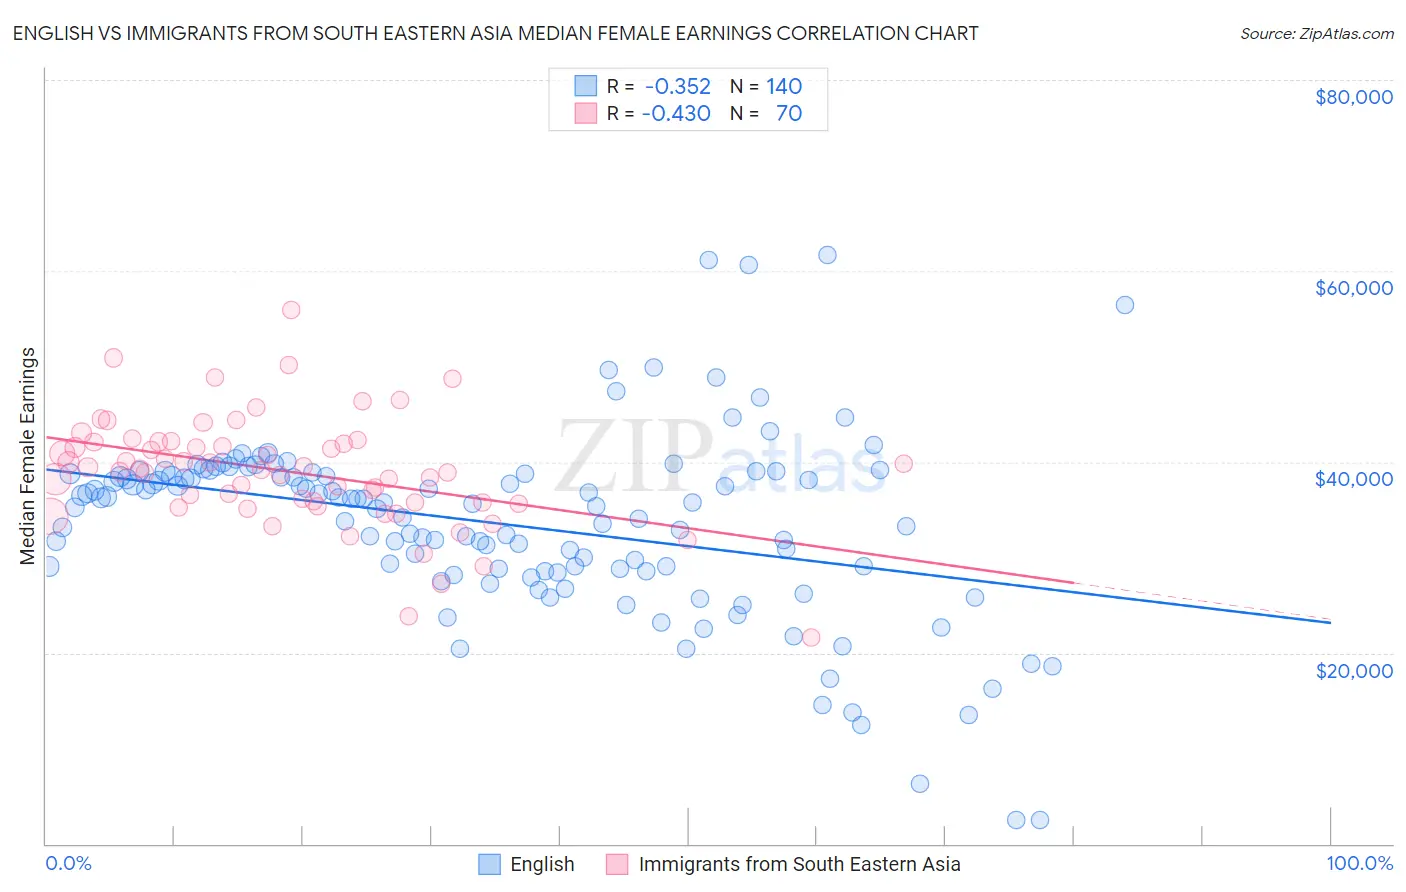 English vs Immigrants from South Eastern Asia Median Female Earnings